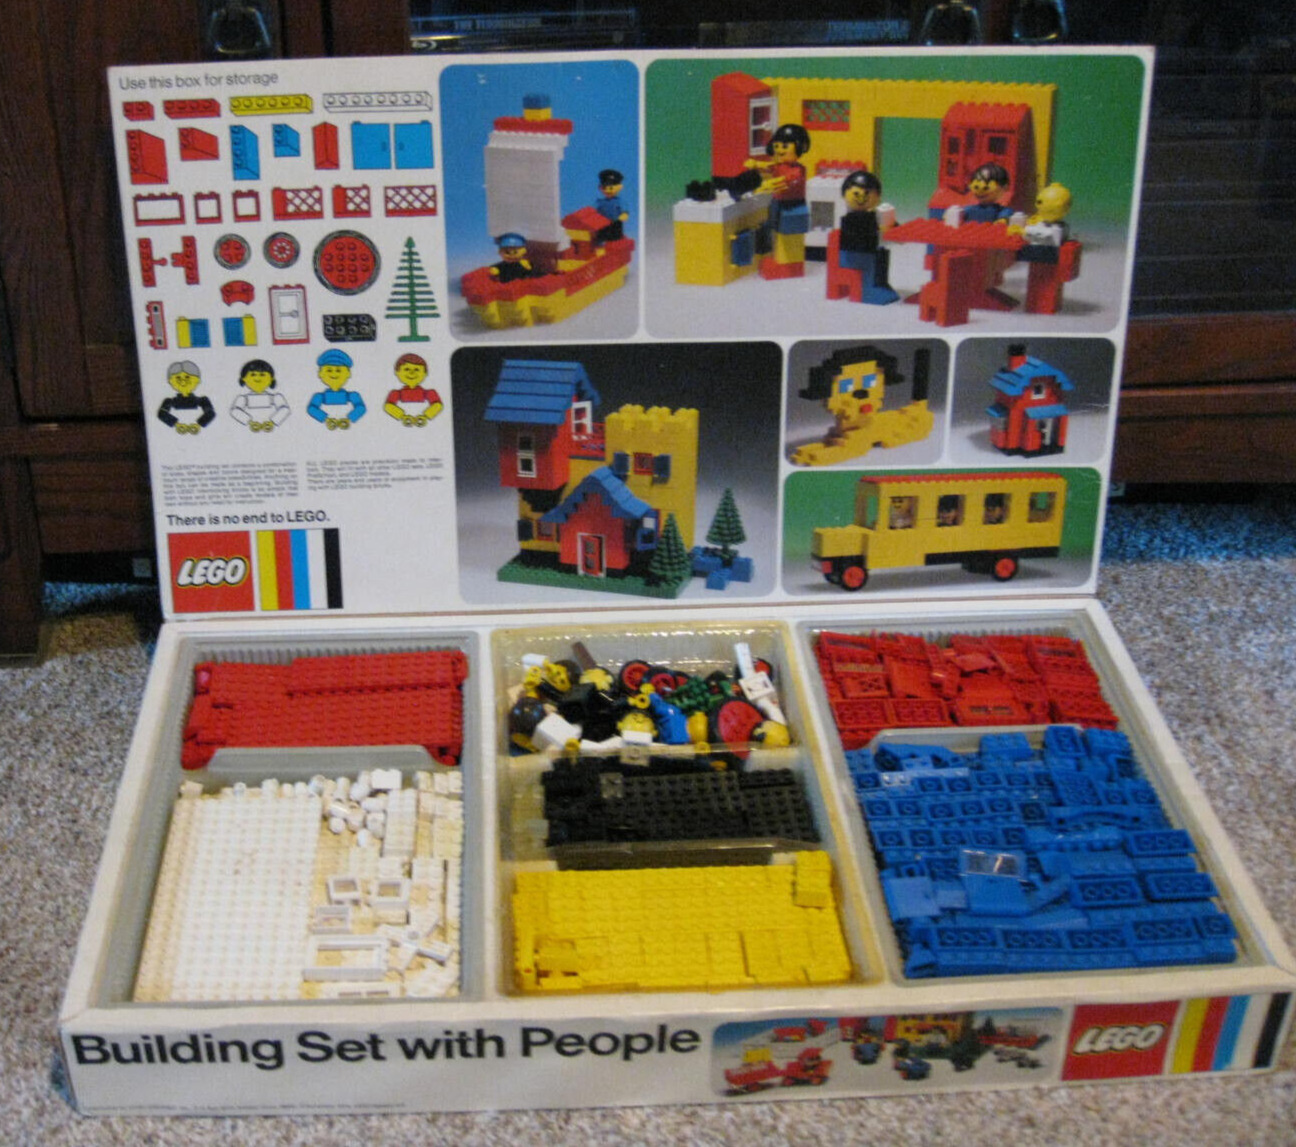 LEGO TOTAL 970 PIECES (HUNDREDS EXTRA)  #190 "BUILDING SET WITH PEOPLE"  1974